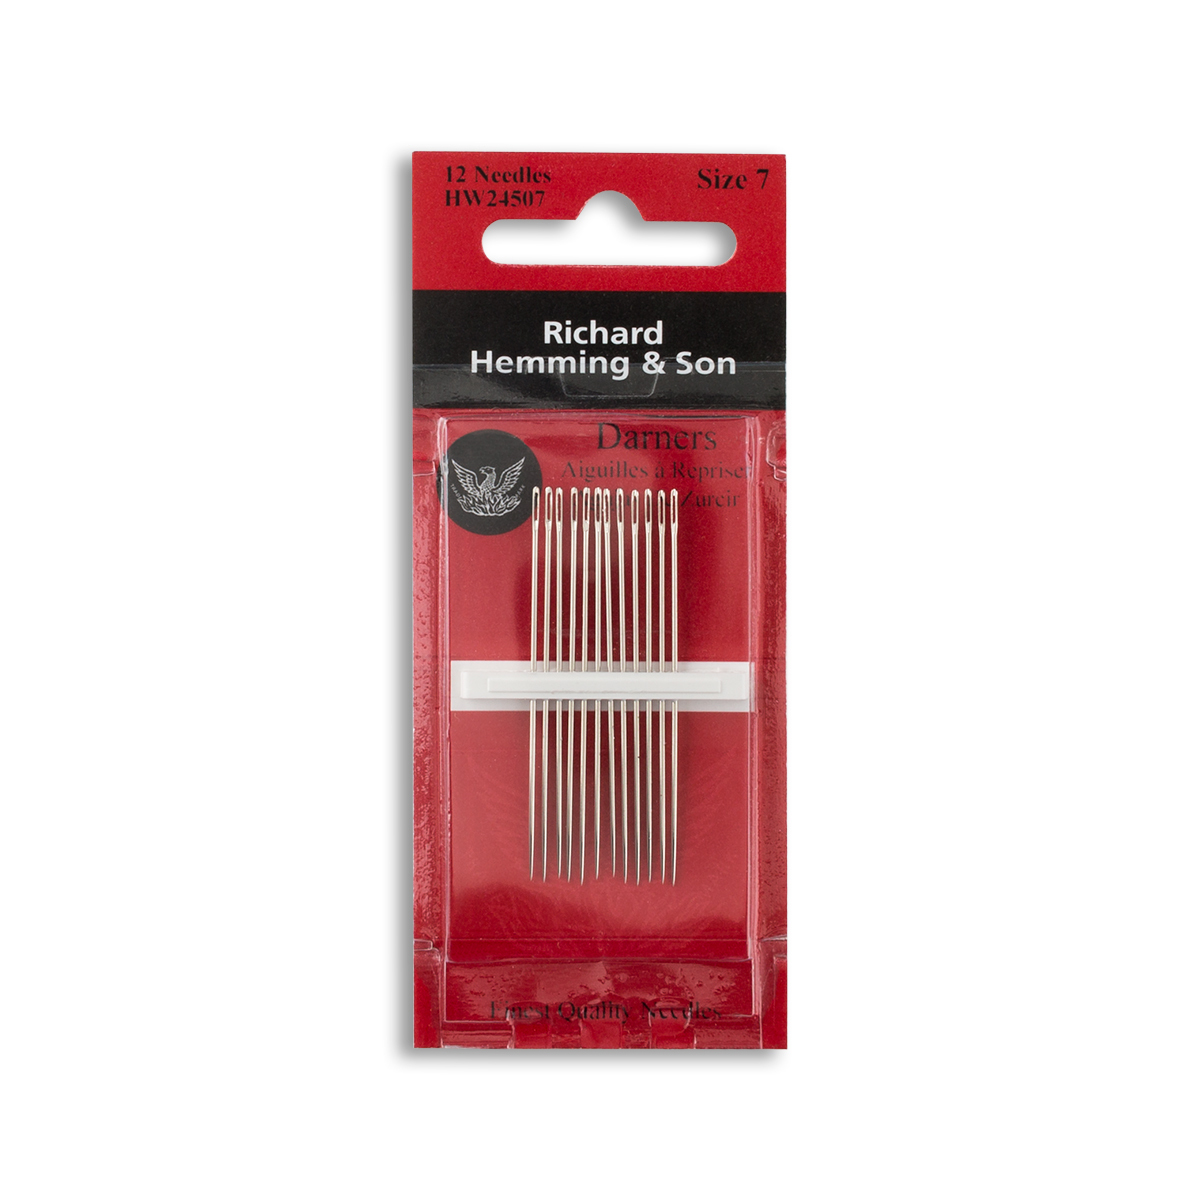 Hello Hobby Long Yarn Darner Hand Sewing Needles, Sizes 14/18, 7 Pieces,  Large Eye Needles - DroneUp Delivery